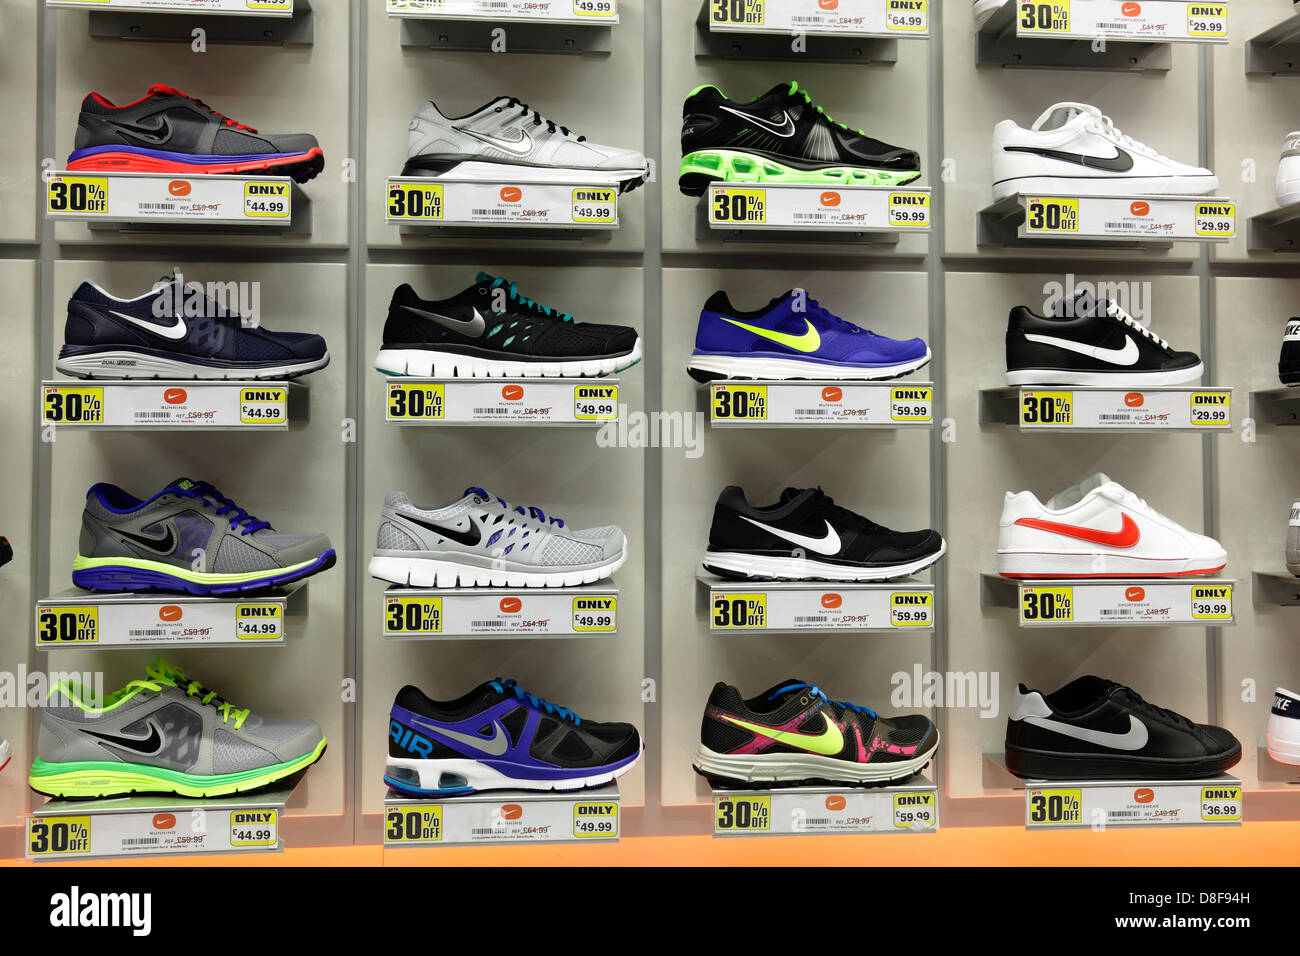 Nike Running Shoes for sale in a Sports Direct Shop, Scotland, UK Stock  Photo - Alamy